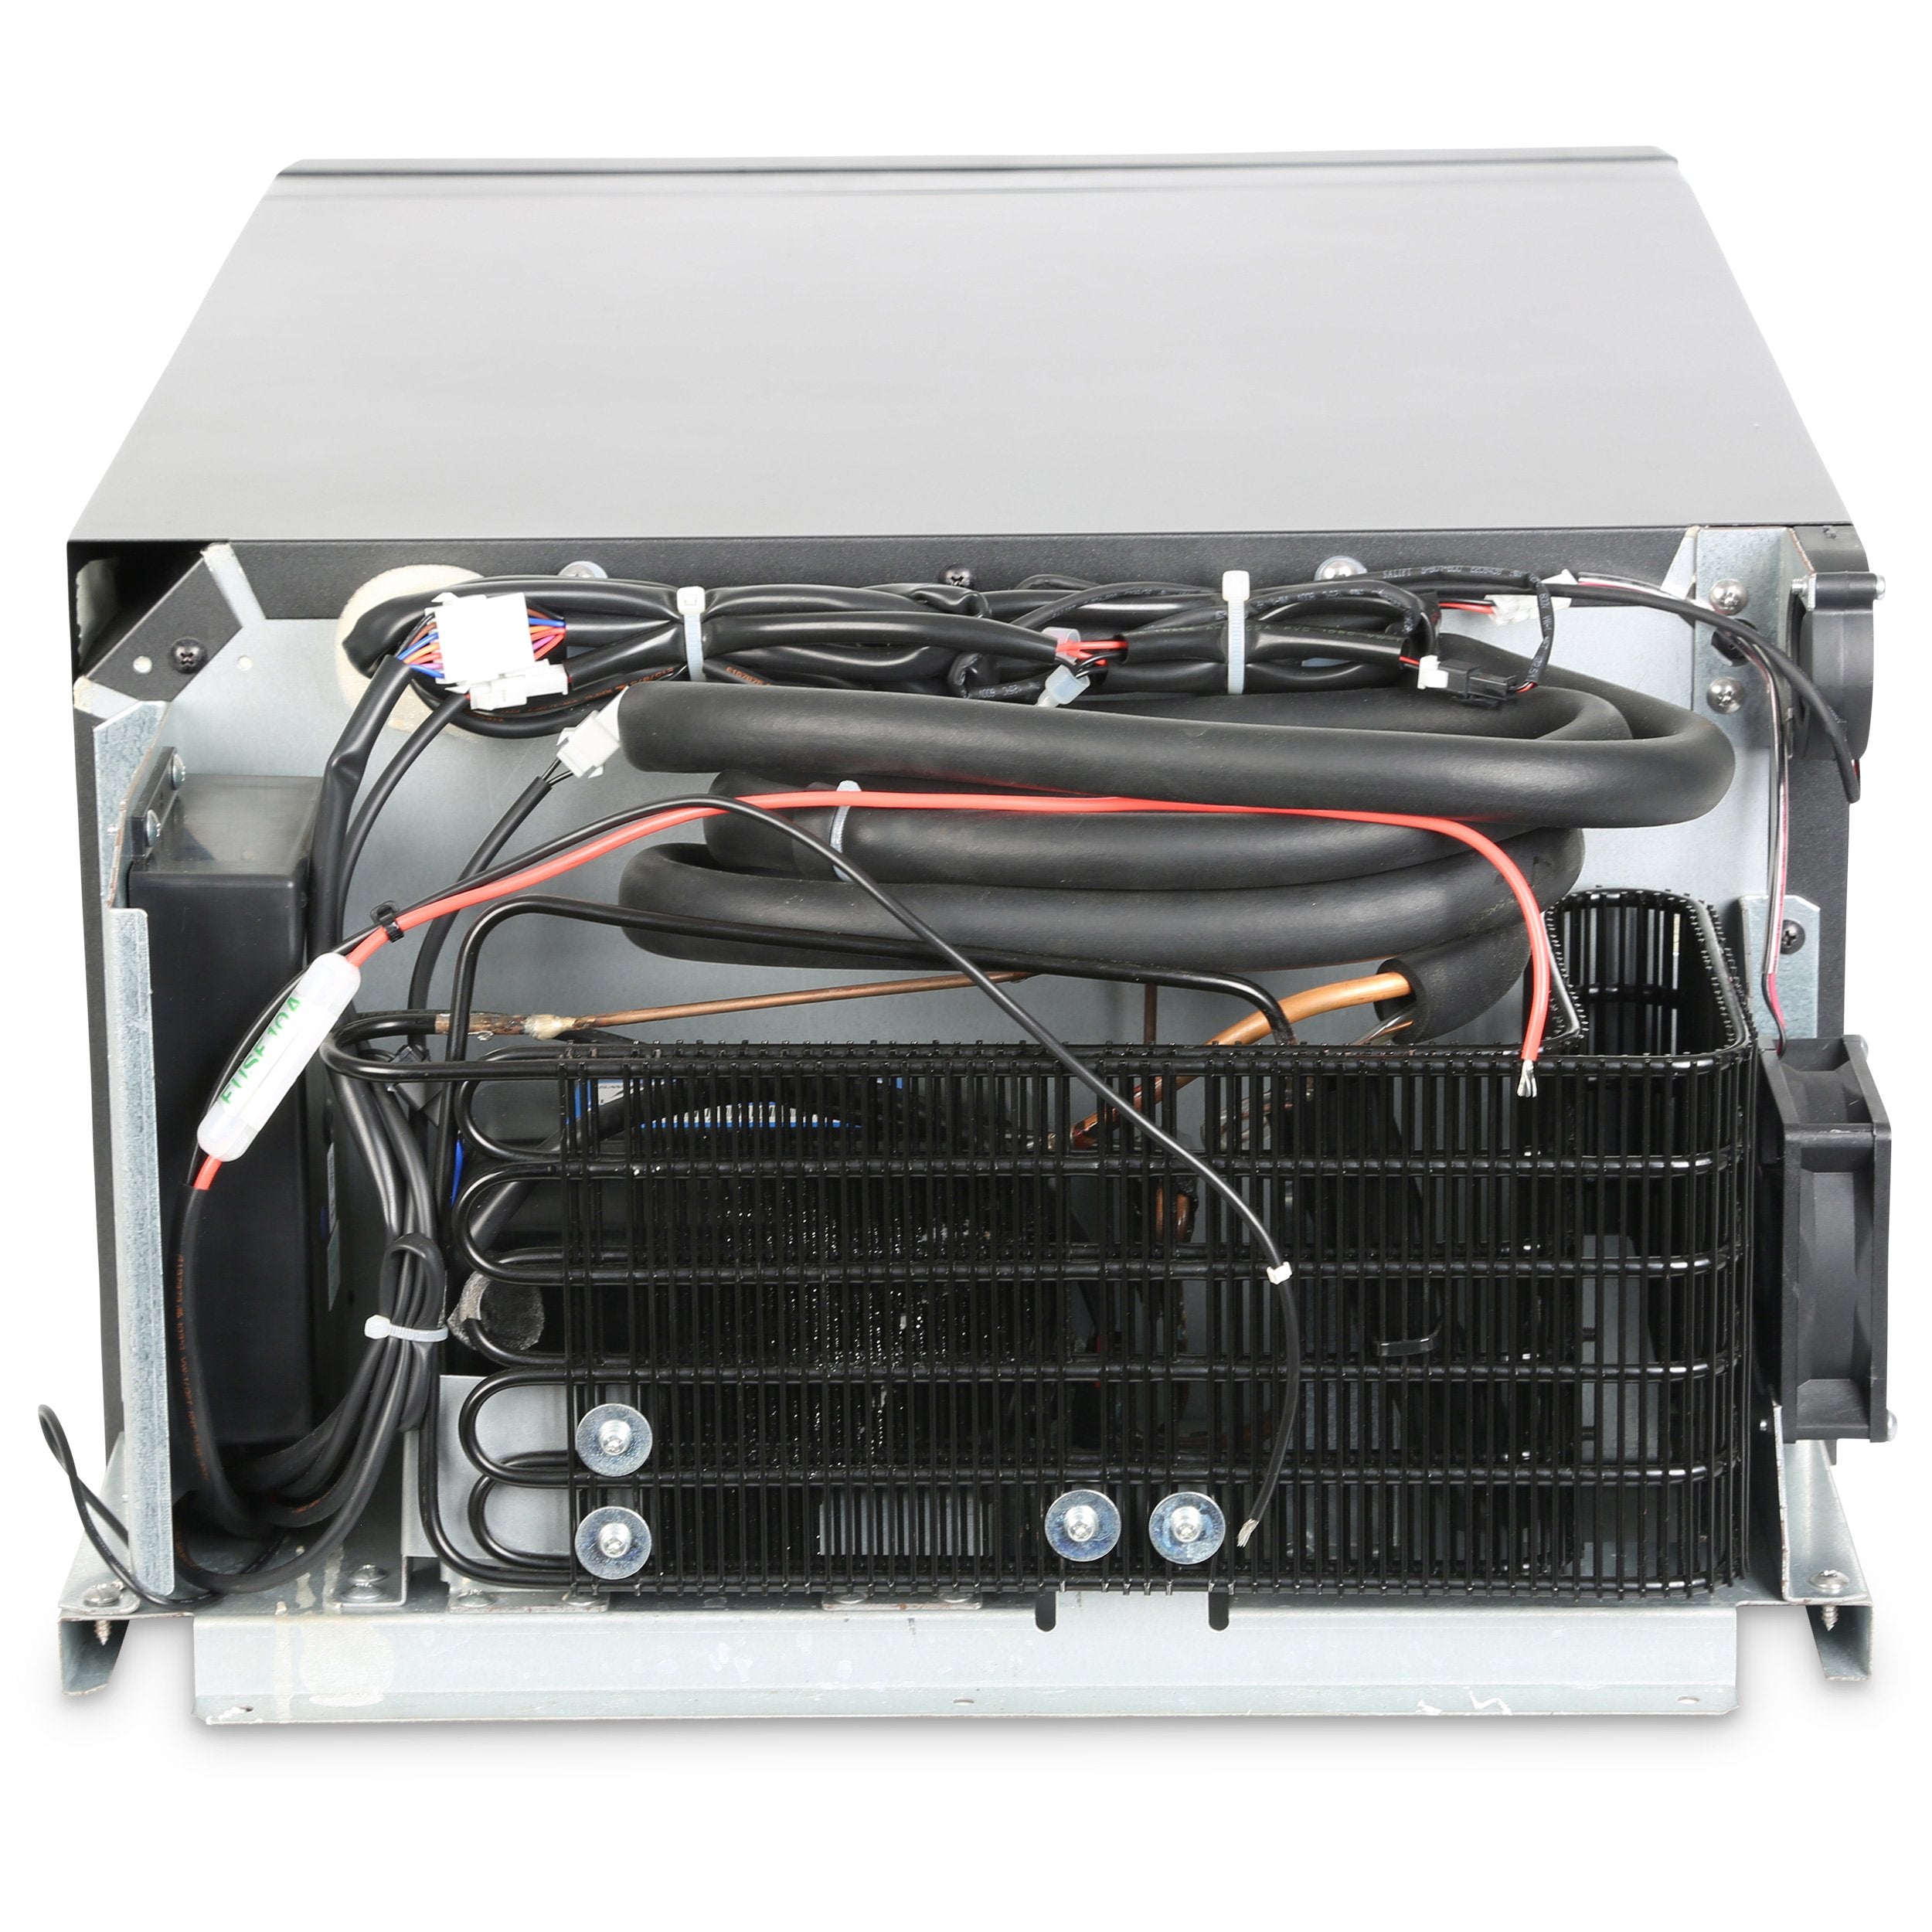 A Engel Coolers SB30 Drawer Style 12/24V DC Only Fridge-Freezer cooling unit with wires attached to it.